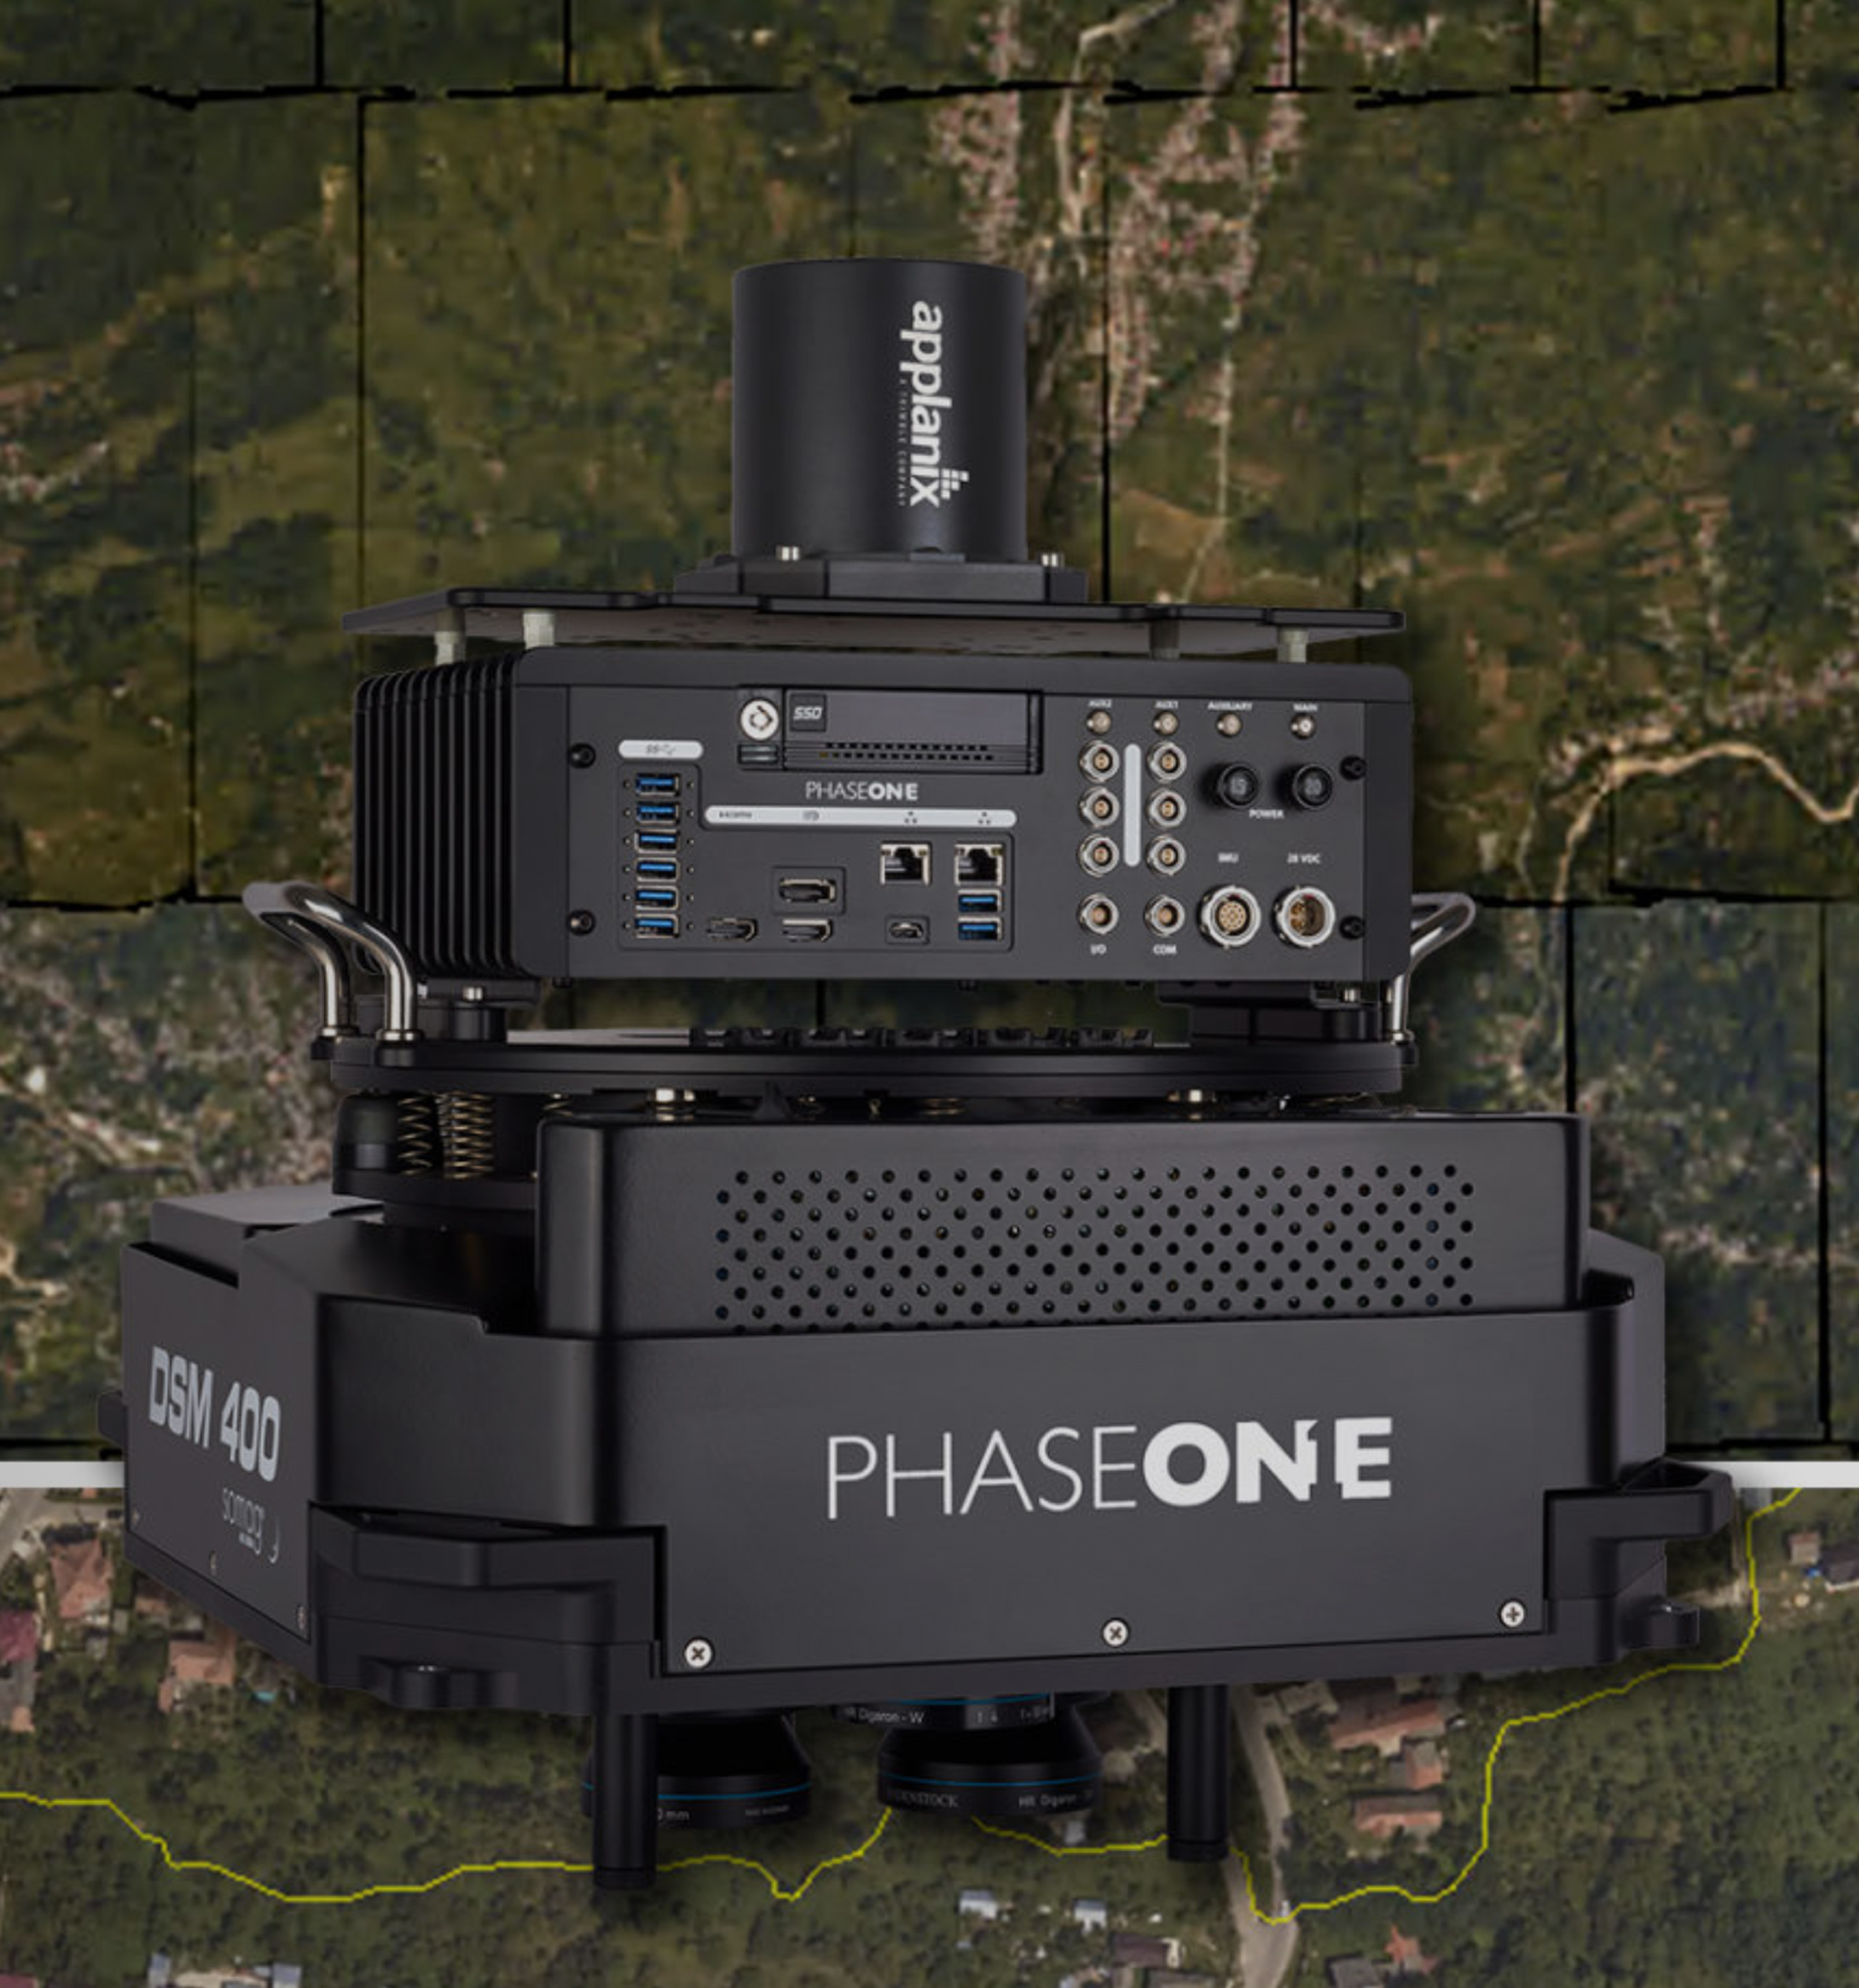 One of the GeoSPatial Phase One systems used for mapping and other specialized applications